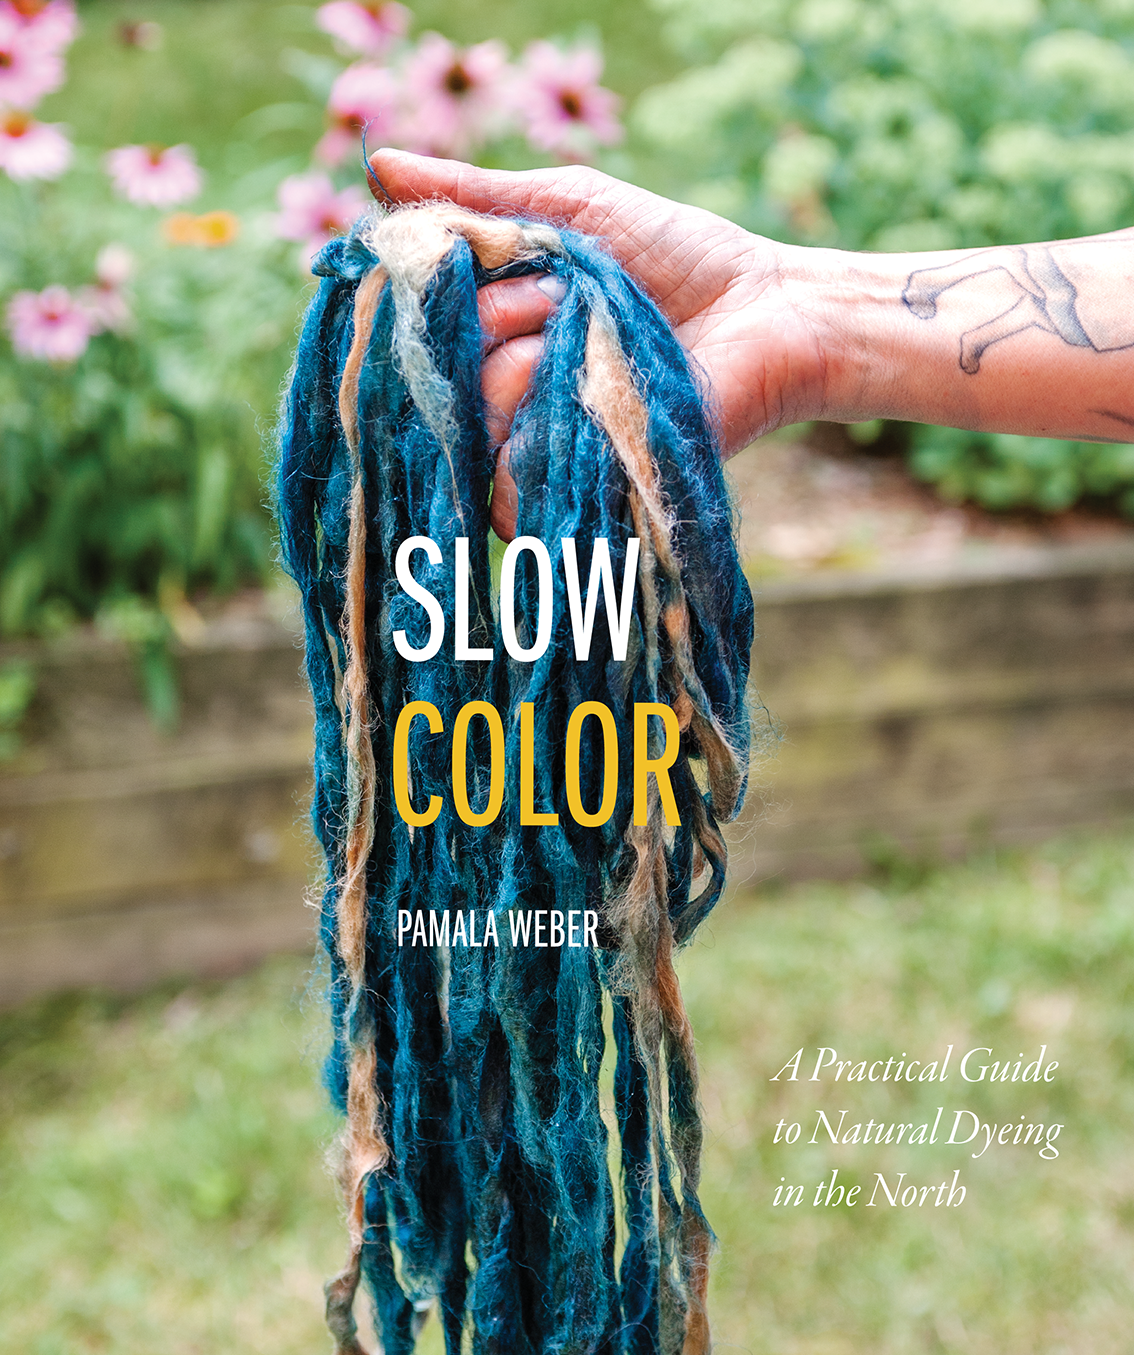 Slow Color: A Practical Guide to Natural Dyeing in the North